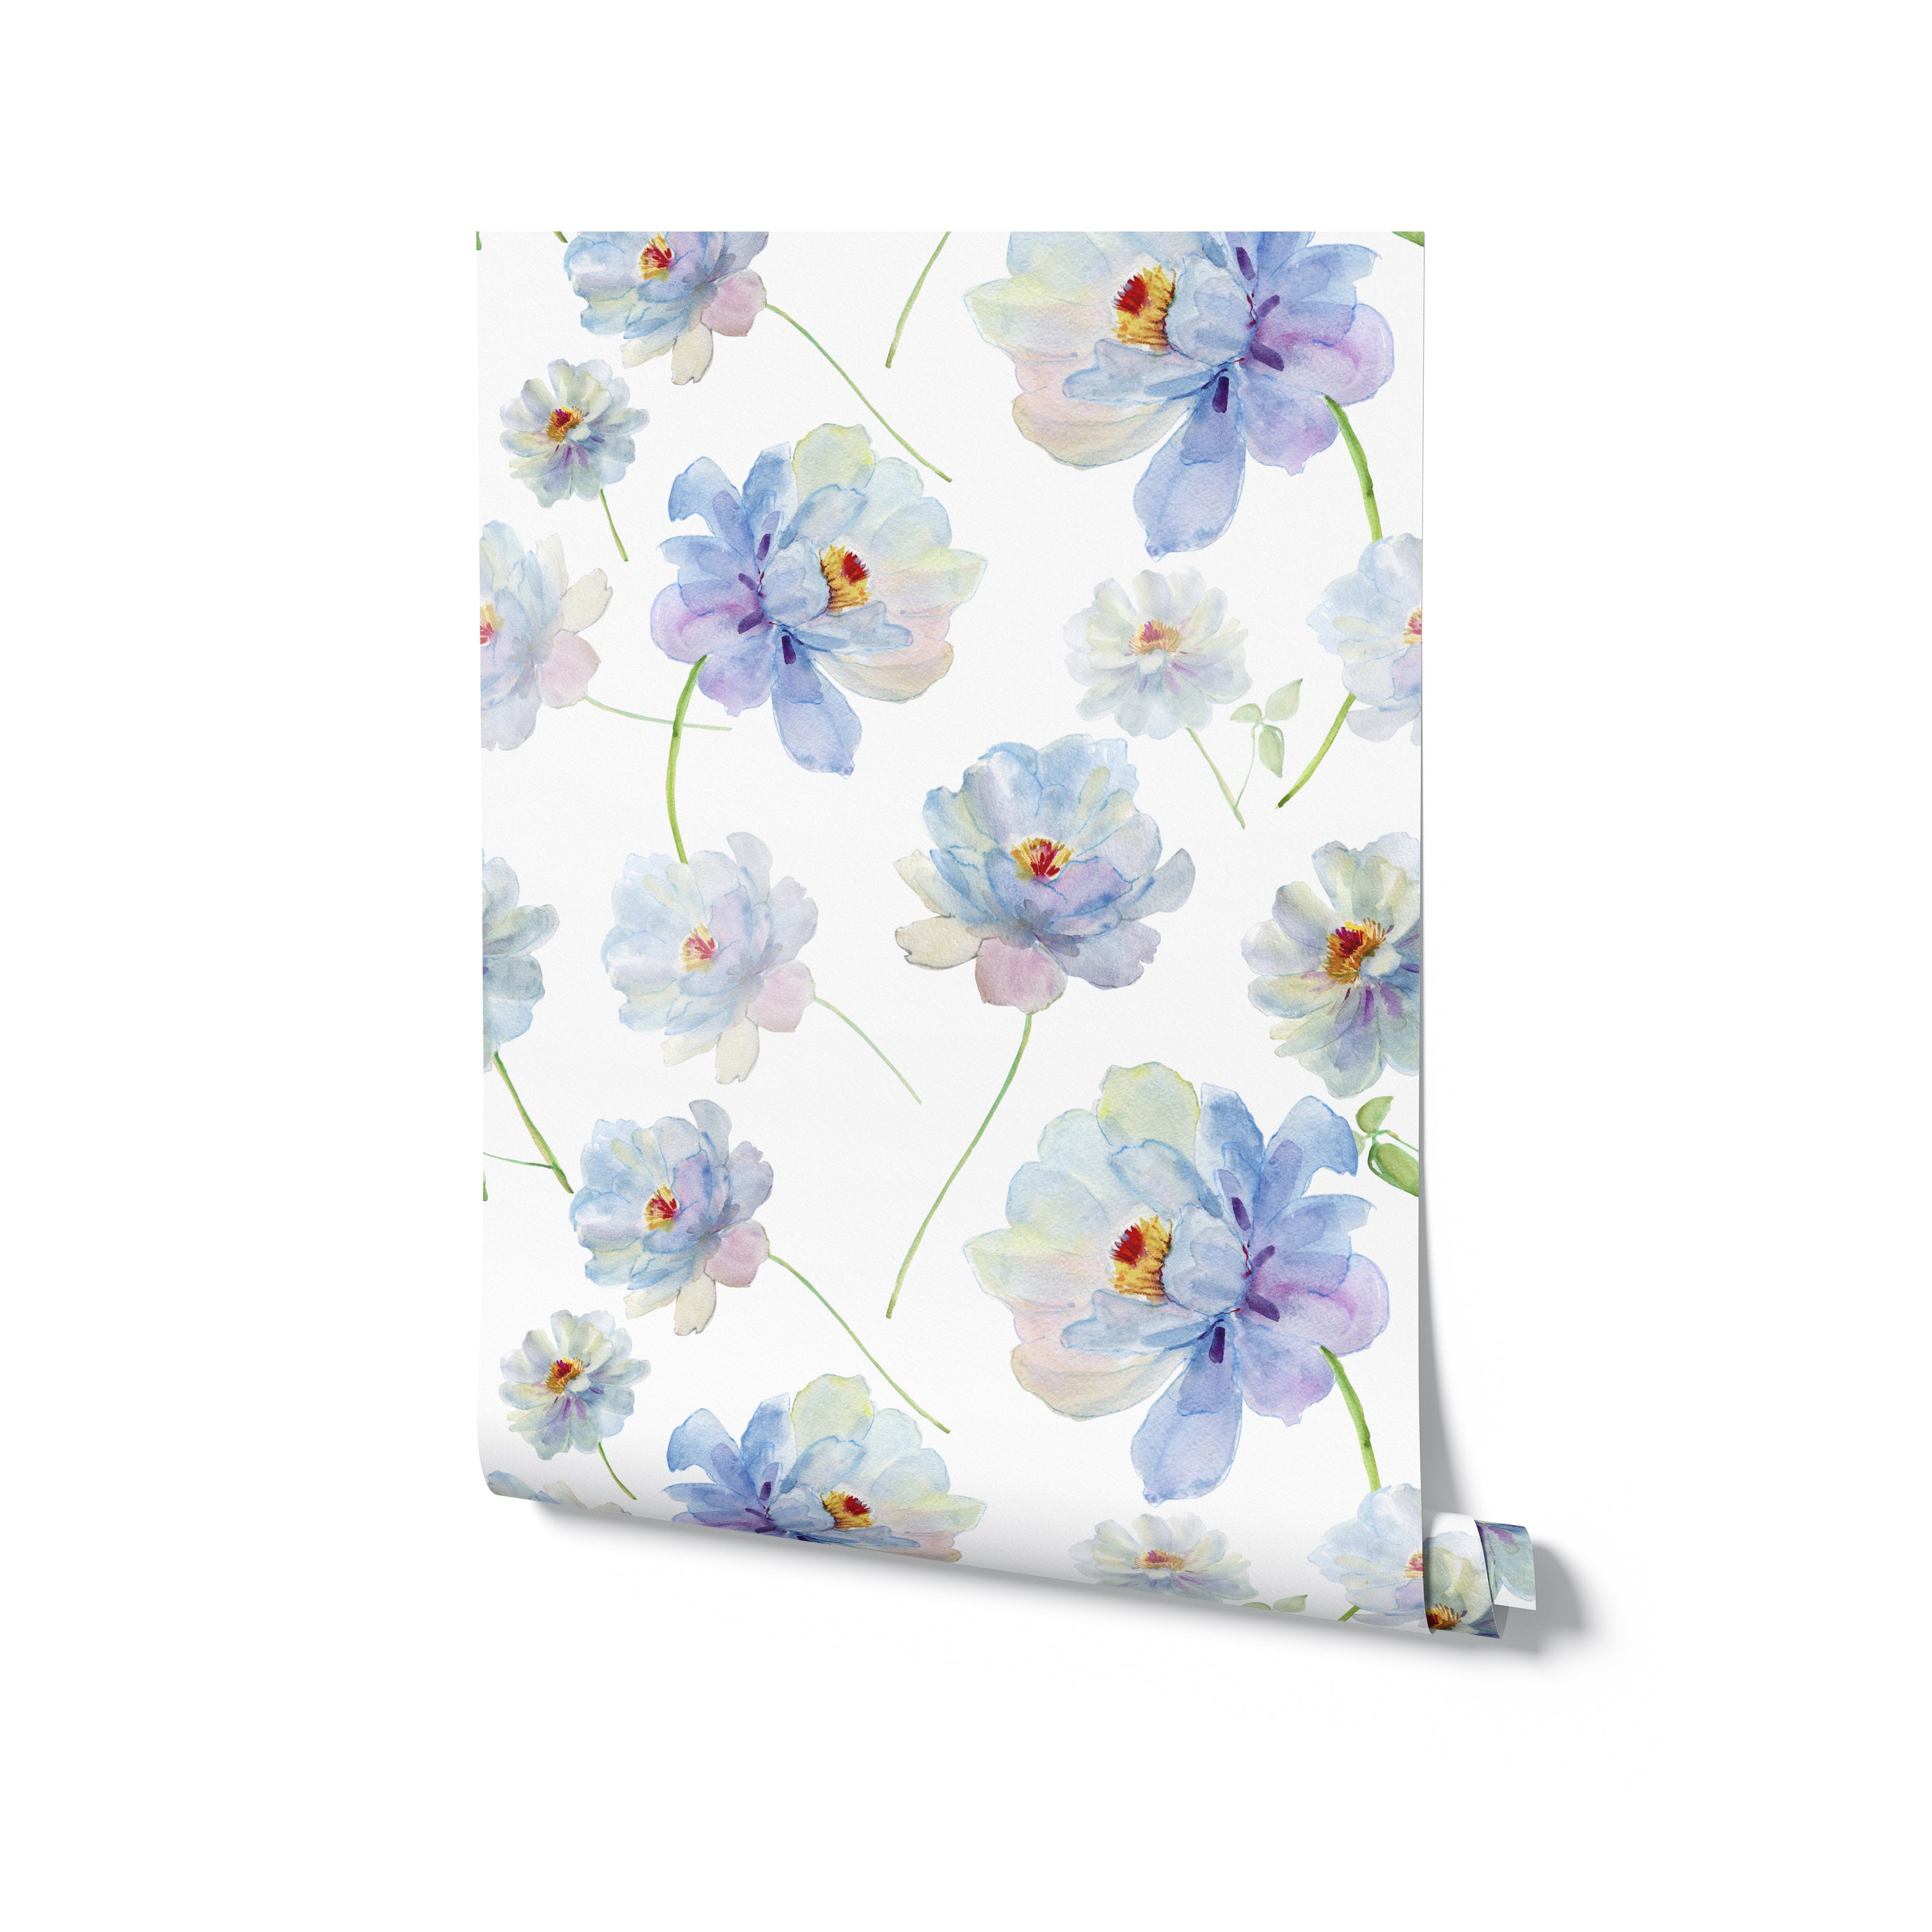 Rolled-up view of Watercolour Bliss Wallpaper showing a detailed and colorful pattern of blue and pink watercolor flowers with green stems on a crisp white background, ideal for creative home decor projects.